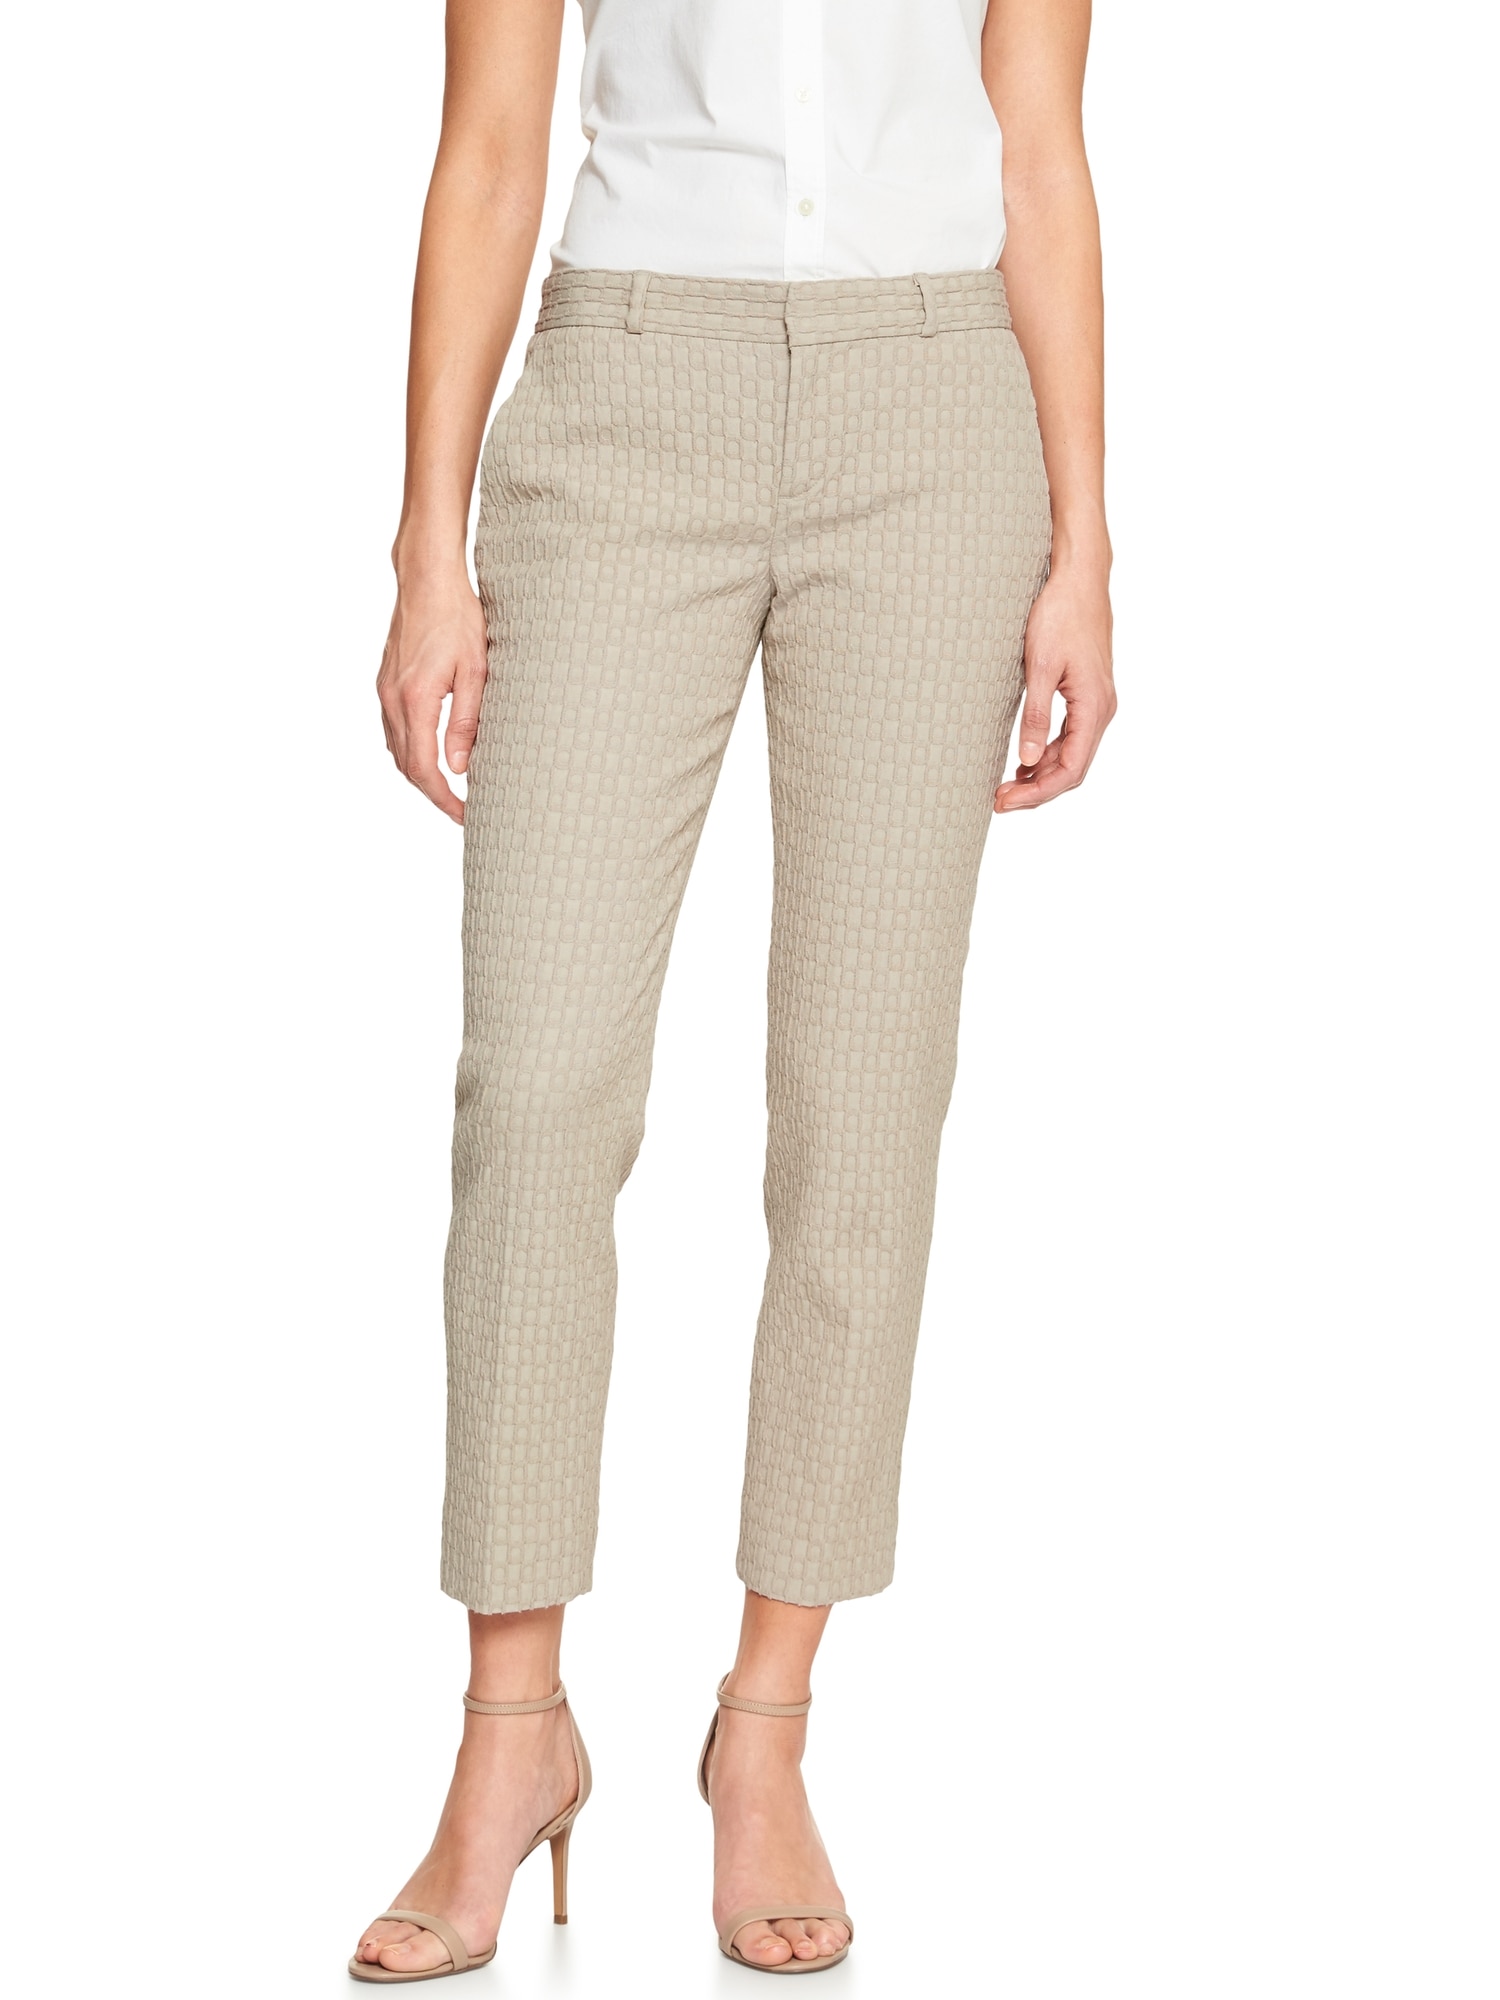 Avery Circle Jacquard Tailored Ankle Pant